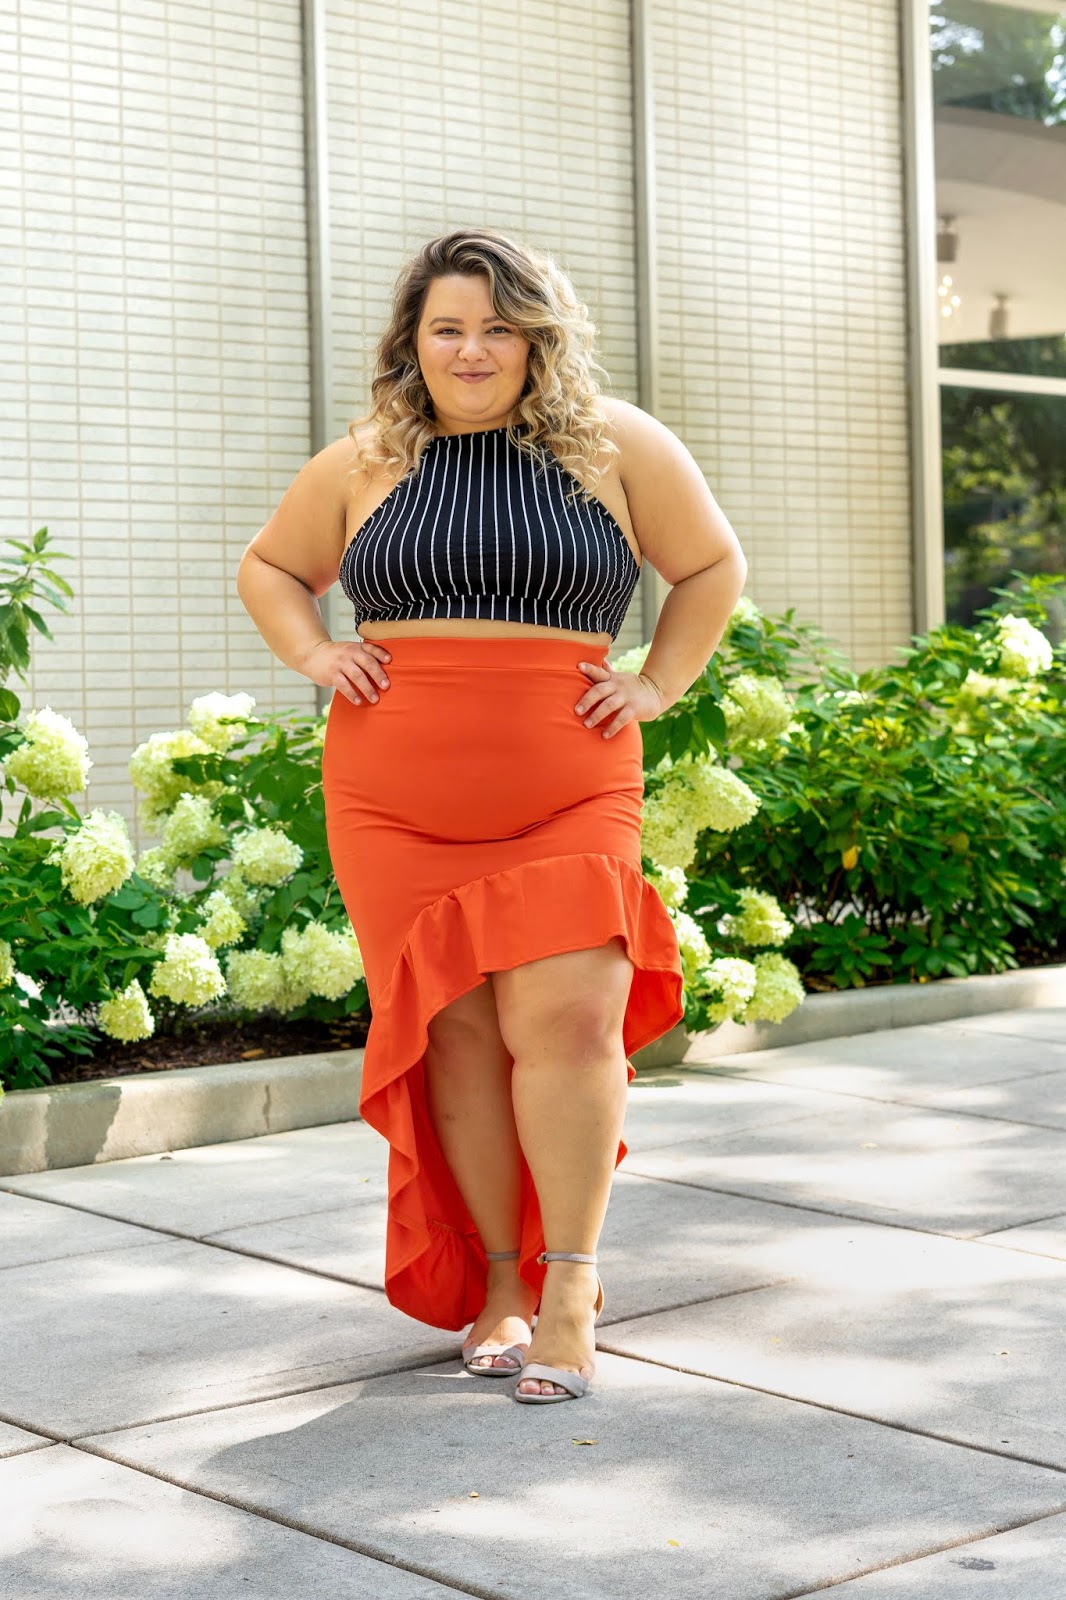 Chicago fashion blogger, Chicago plus size fashion blogger, natalie Craig, natalie in the city, plus size fashion, Chicago fashion, plus size fashion blogger, eff your beauty standards, fatshion, skorch magazine, Chicago model, plus size model, plus size petite, affordable plus size clothing, embrace your curves, plus model magazine,  petite plus size, prettylittlething, ruffle skirt, orange, striped halter, plus size halter tops, prettylittleting plus